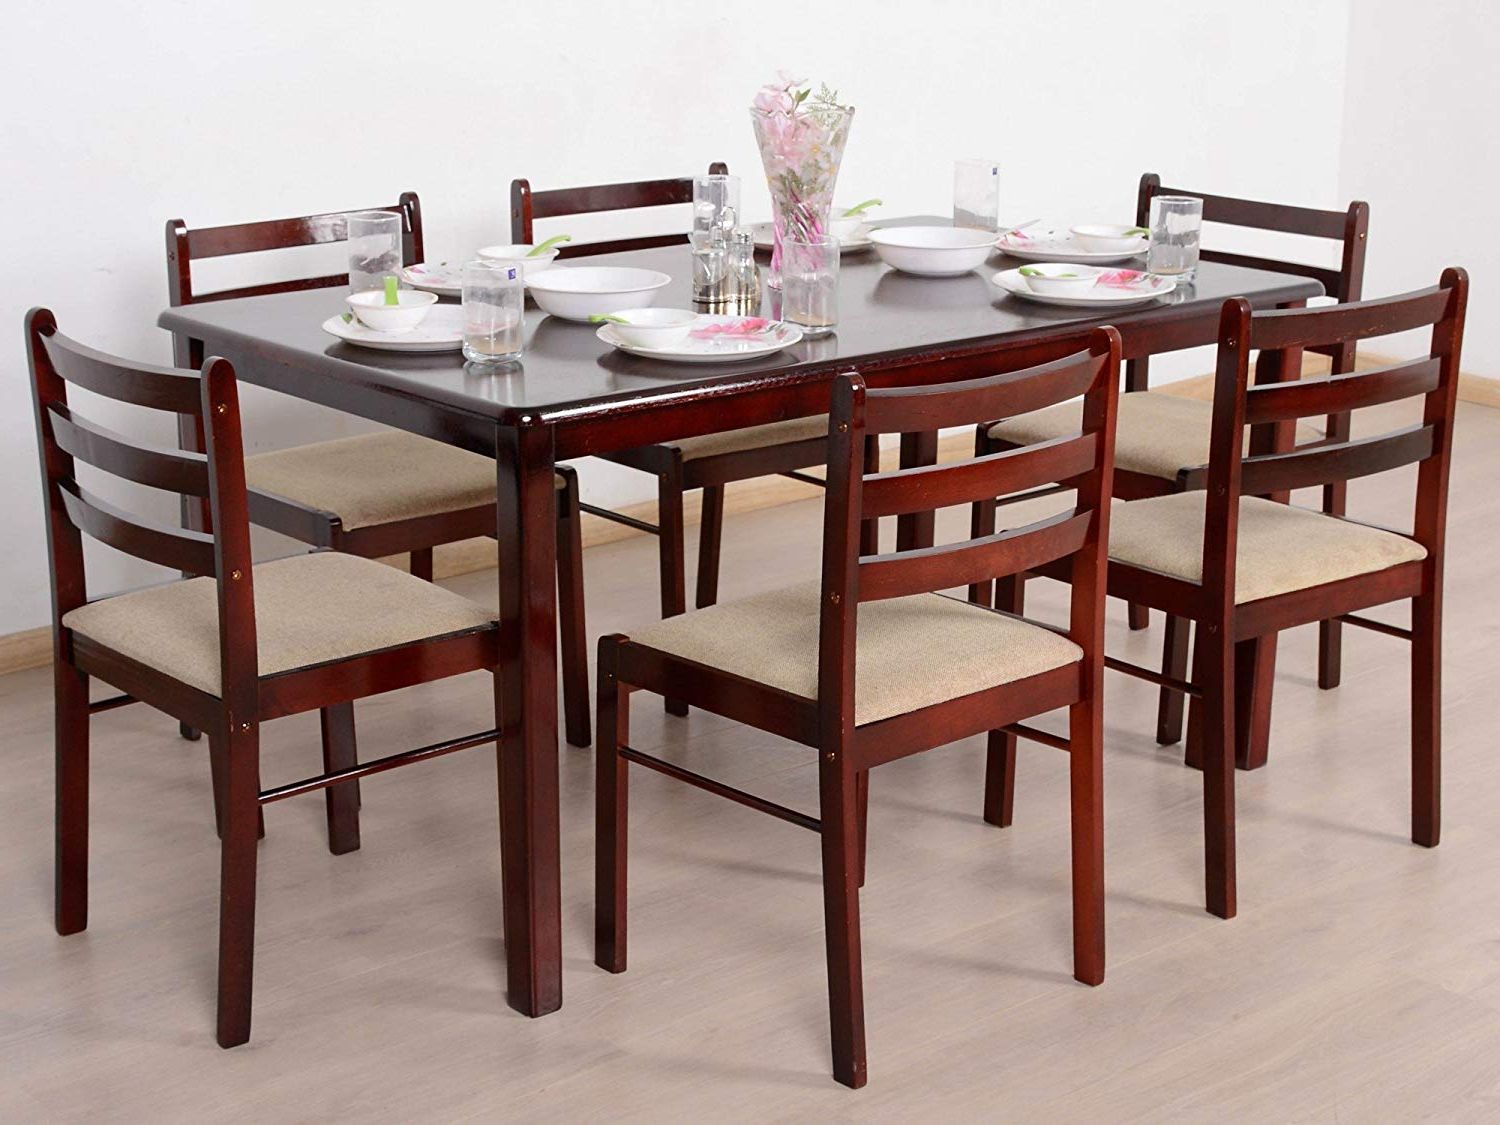 T2a Javint Six Seater Contemporary Solid Wood Dining Table Pertaining To Widely Used 6 Seater Retangular Wood Contemporary Dining Tables 